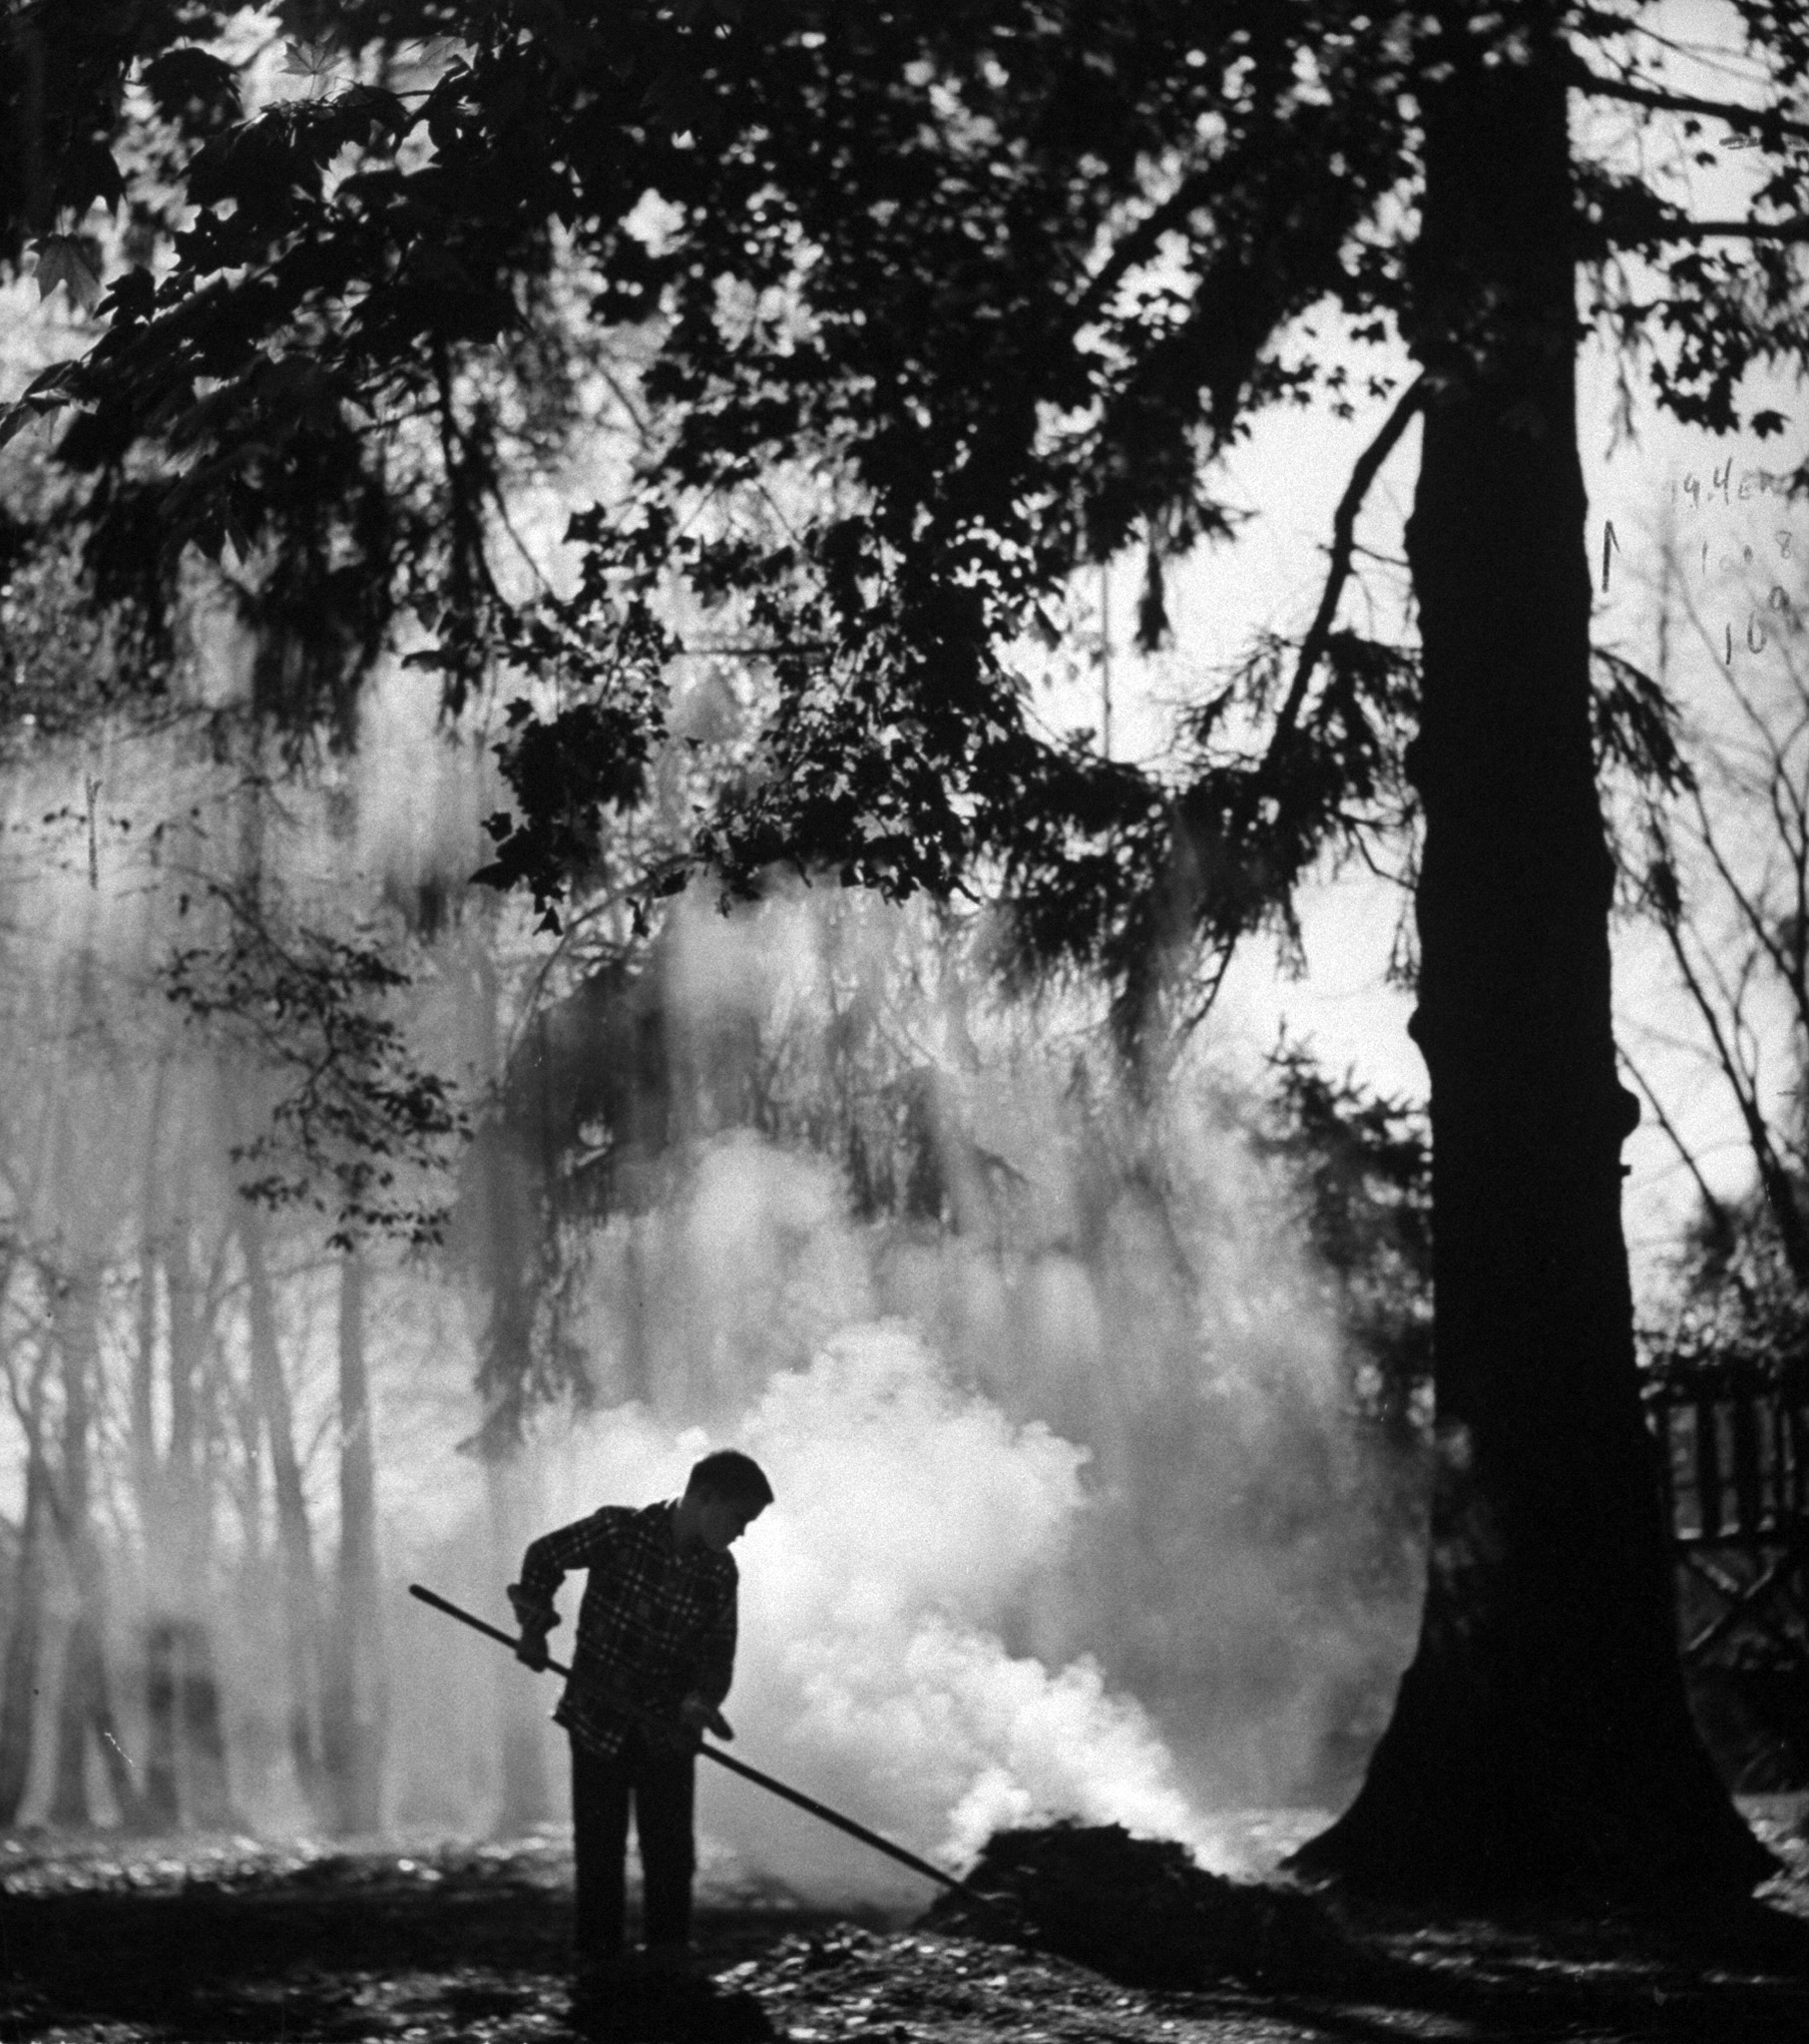 Combining play and seasonal chore, Doyce Waddell stirs a pile of burning leaves, and the smoke and gentle wind almost smother the slanting sunlight of autumn.